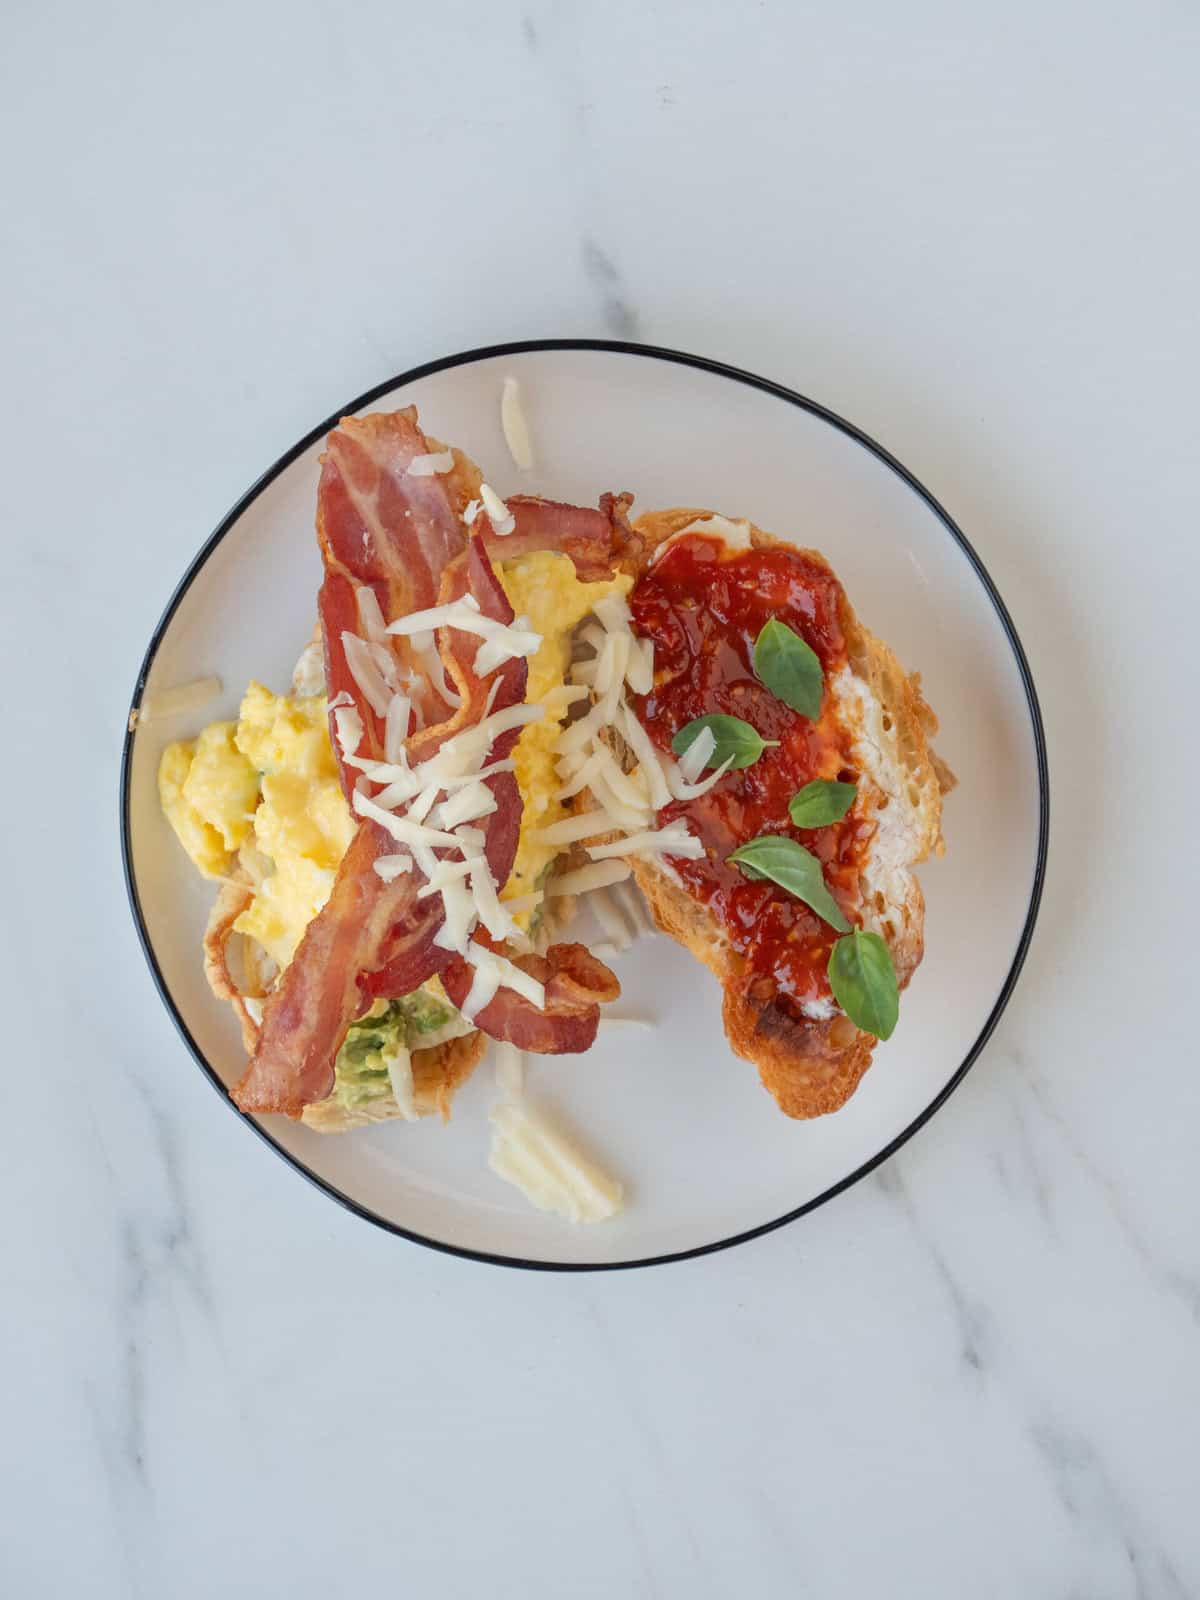 A plate with two toasted halves of a croissant, one with mayonnaise, tomato jam and basil leaves, and the other half spread with mayonnaise, smashed avocado, soft scrambled eggs, bacon and shredded fontina.